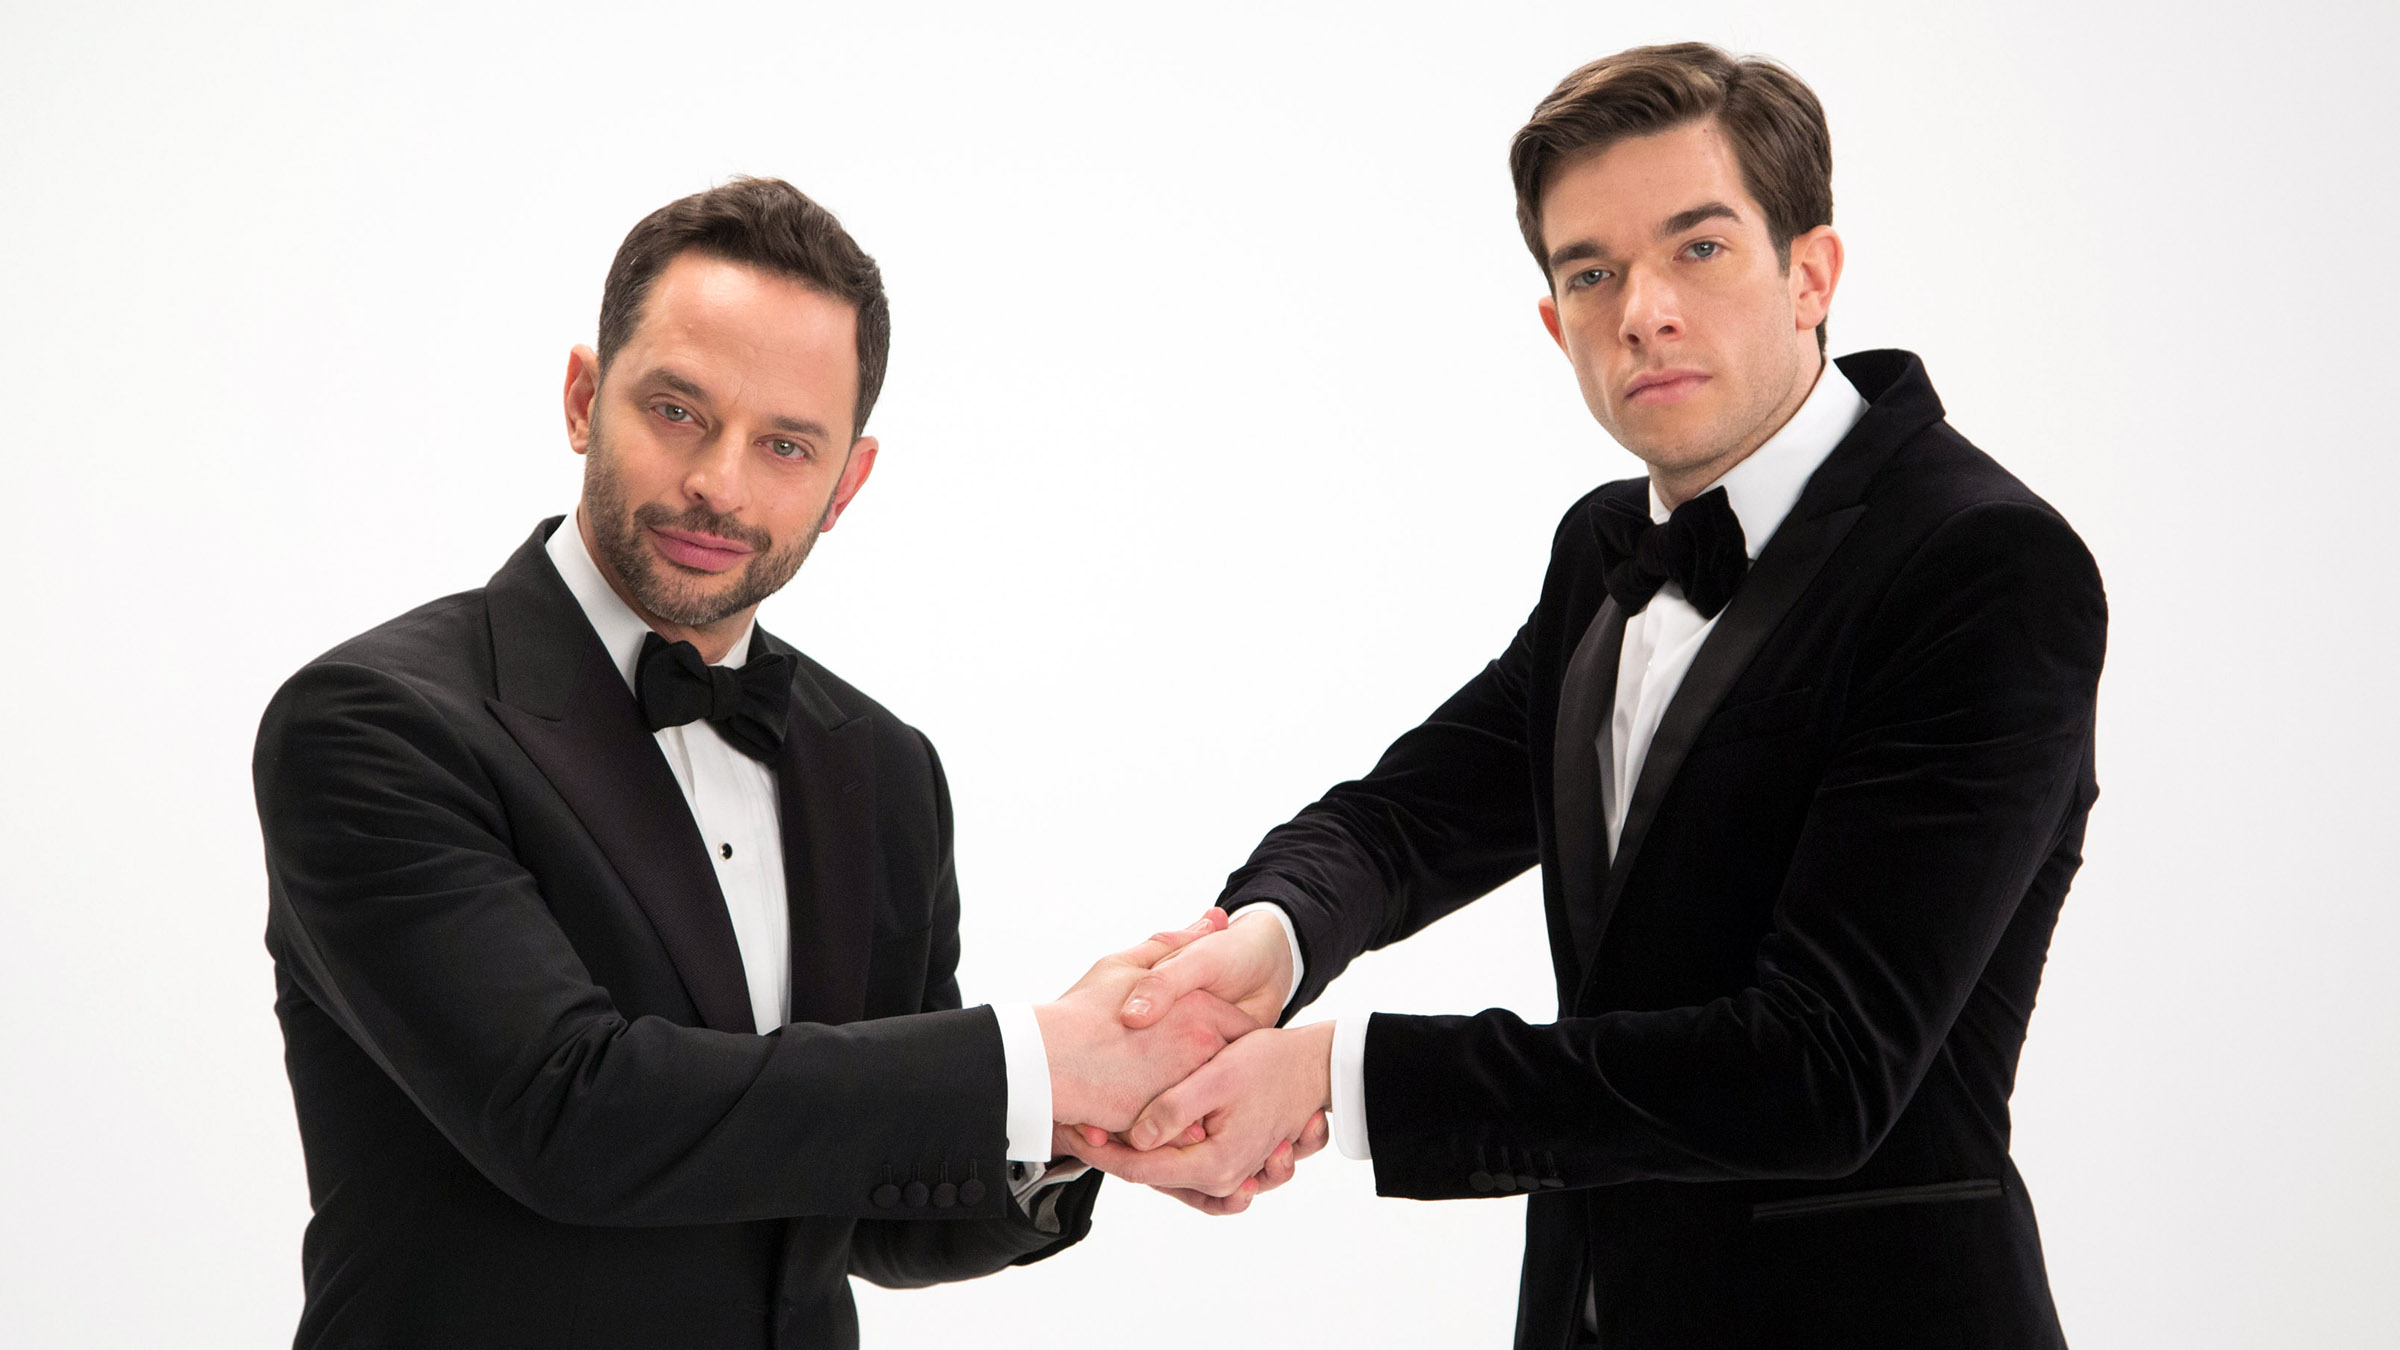 SOLD OUT! - NICK KROLL and JOHN MULANEY in a Live Read of MY DINNER WITH ANDRE